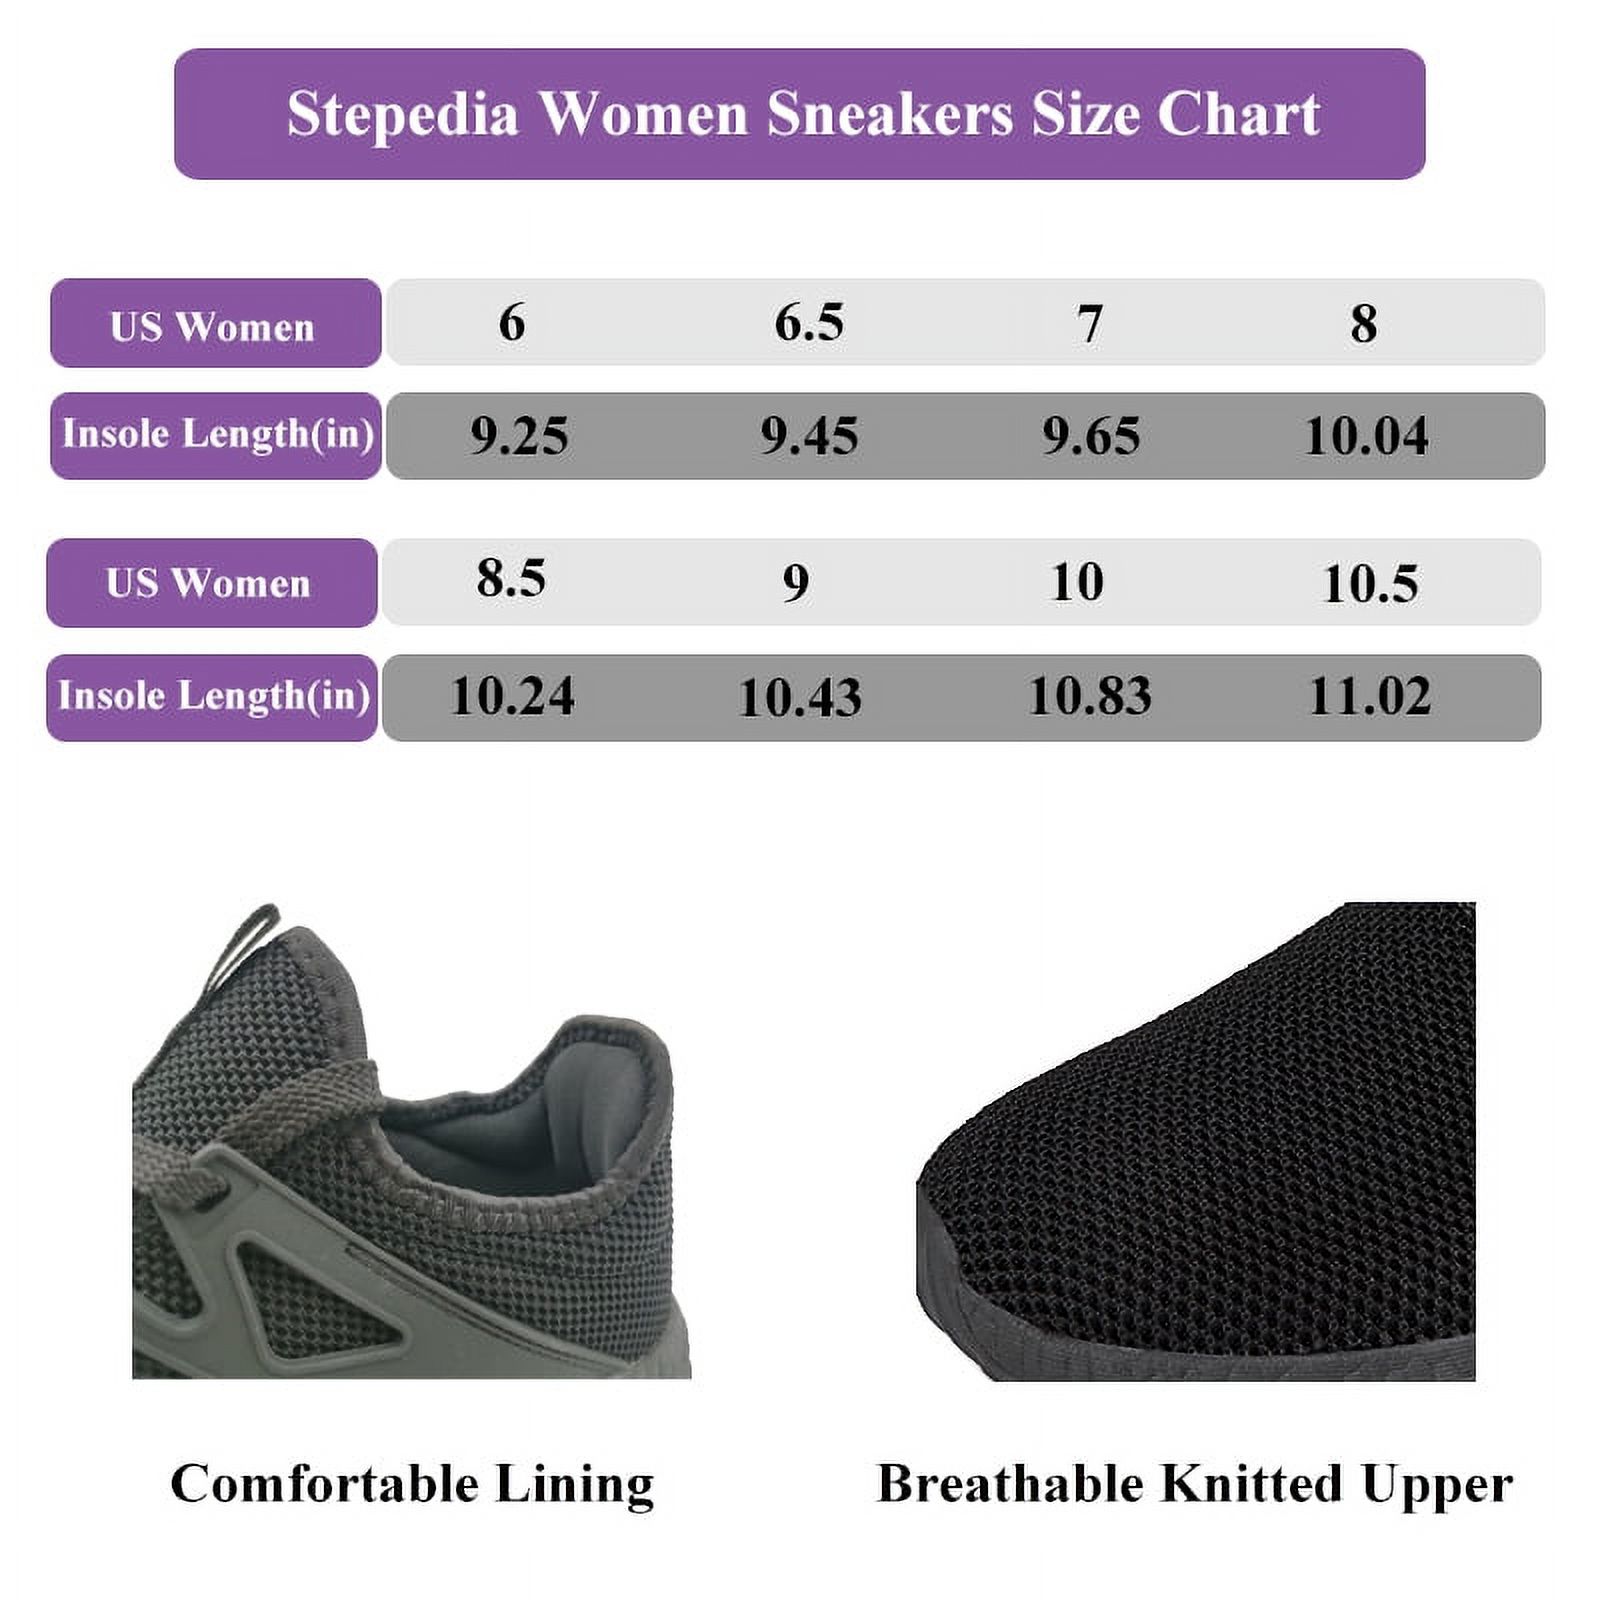 Stepedia Tennis Shoes for Women Lightweight Sneakers Workout Non Slip Athletic Shoes Size 8.5 - image 2 of 6